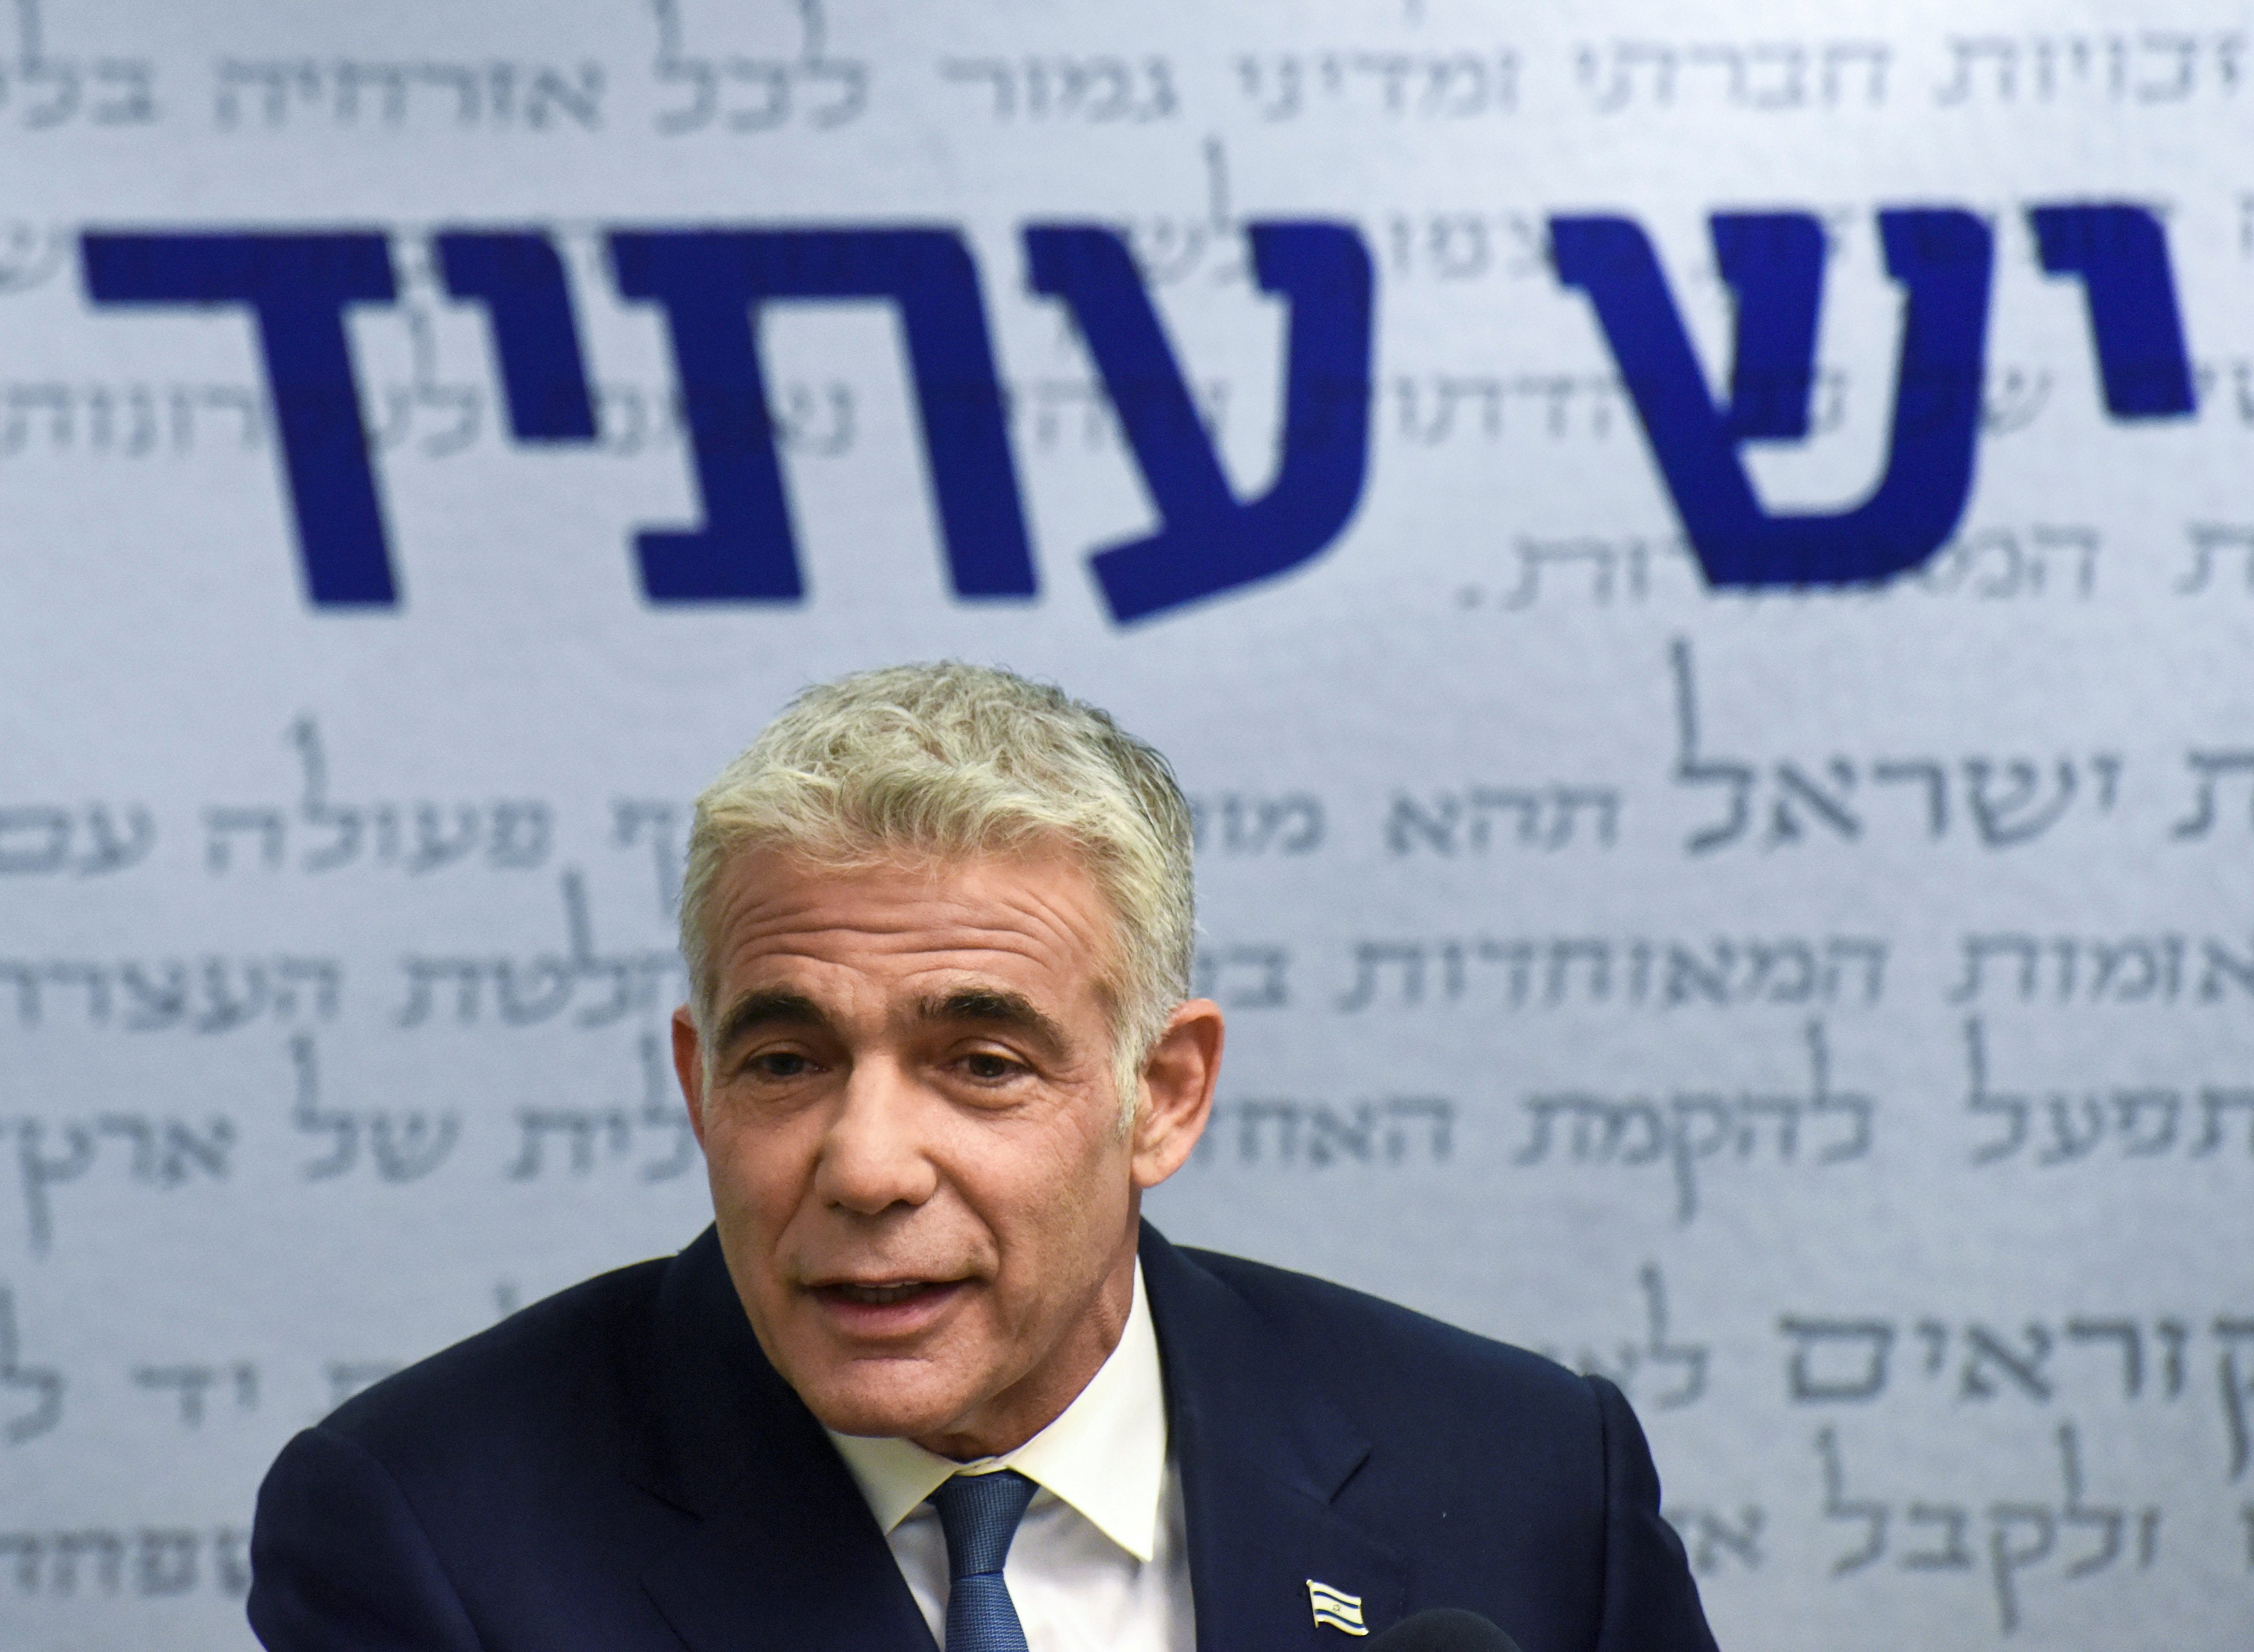 Israel’s Lapid enlists Gantz, moves closer to unseating Netanyahu